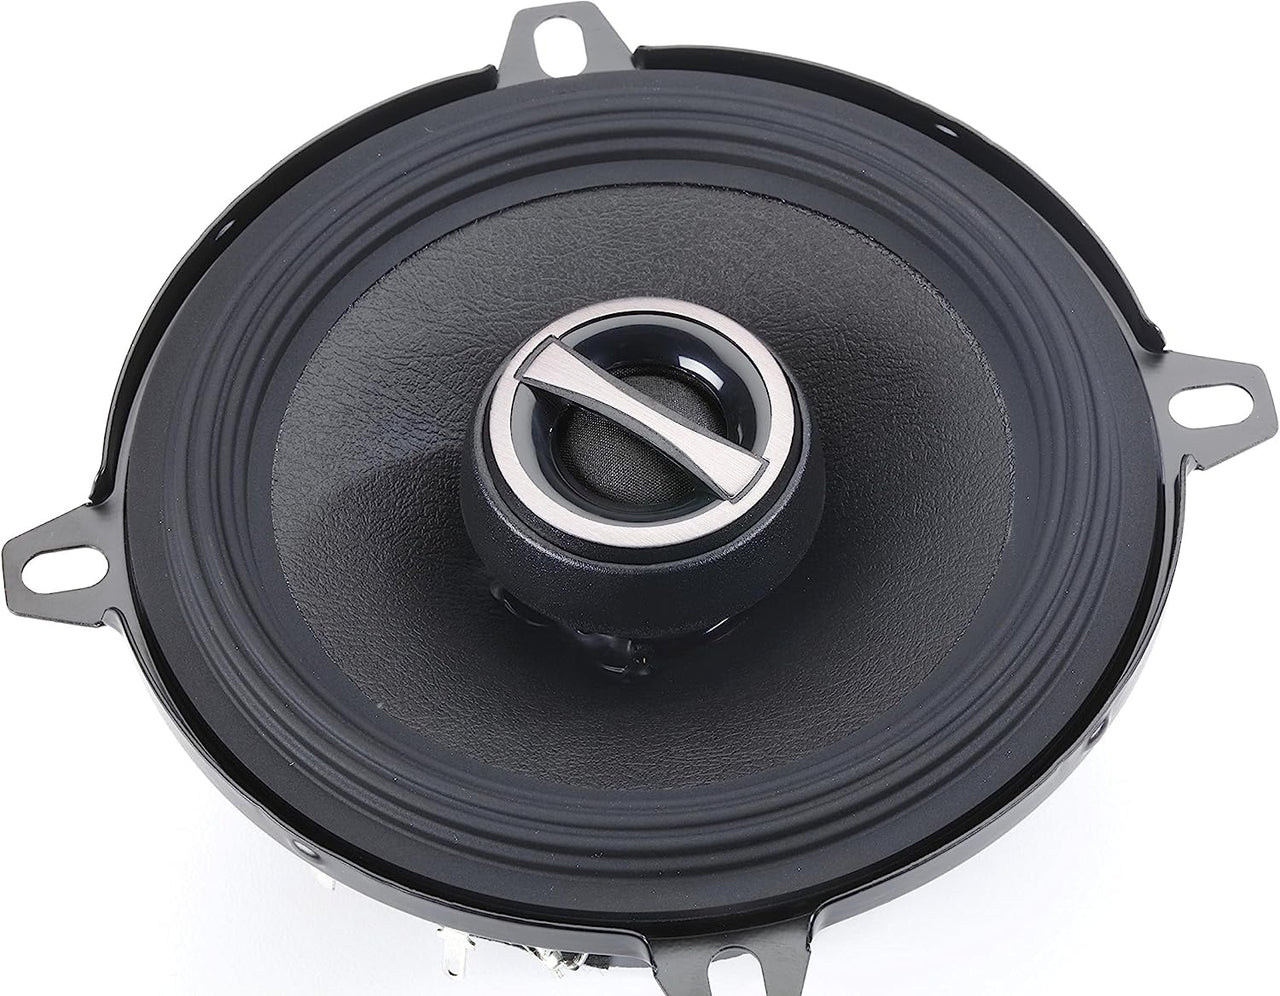 2 Pair Alpine S-S50 5.25" S-Series 2-Way Coaxial Speakers with TW500 & Mobile Bracket & Electrical Tape